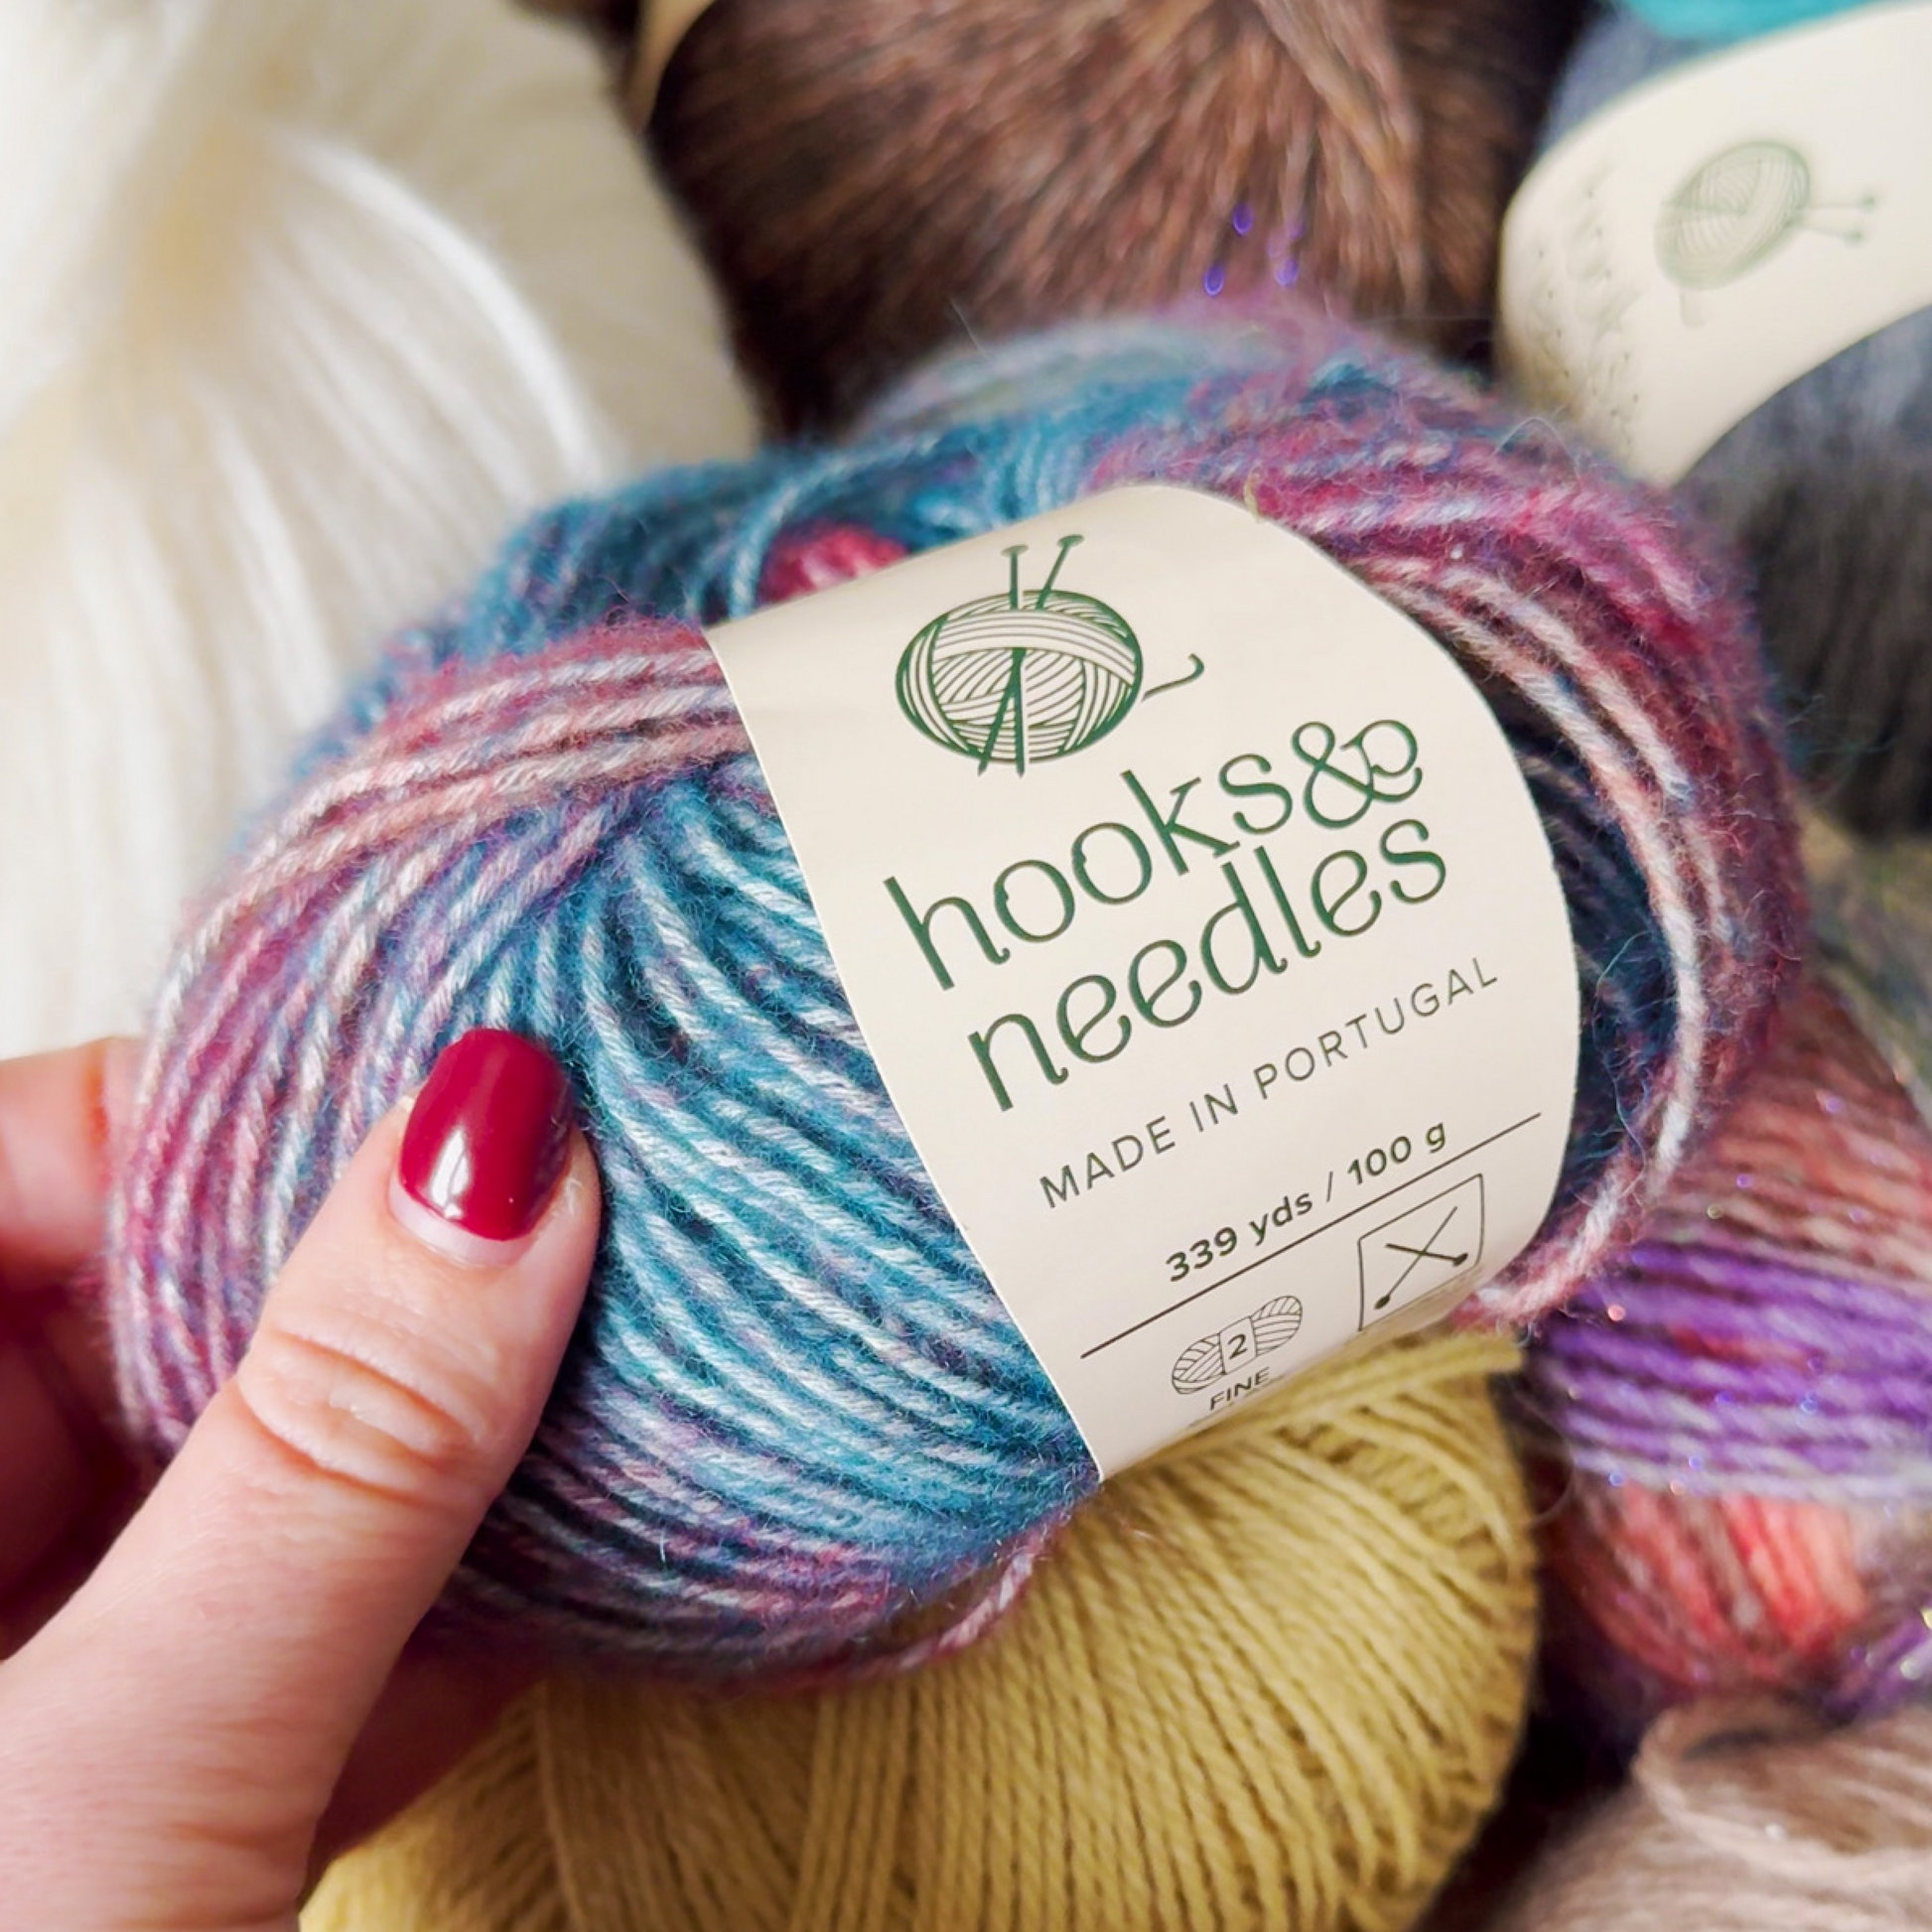 A hand holding a colorful skein of yarn with a label that reads "6-Month-Prepaid Hooks & Needles Subscription Box #30, made in portugal, 100g" against a backdrop of various yarn skeins.